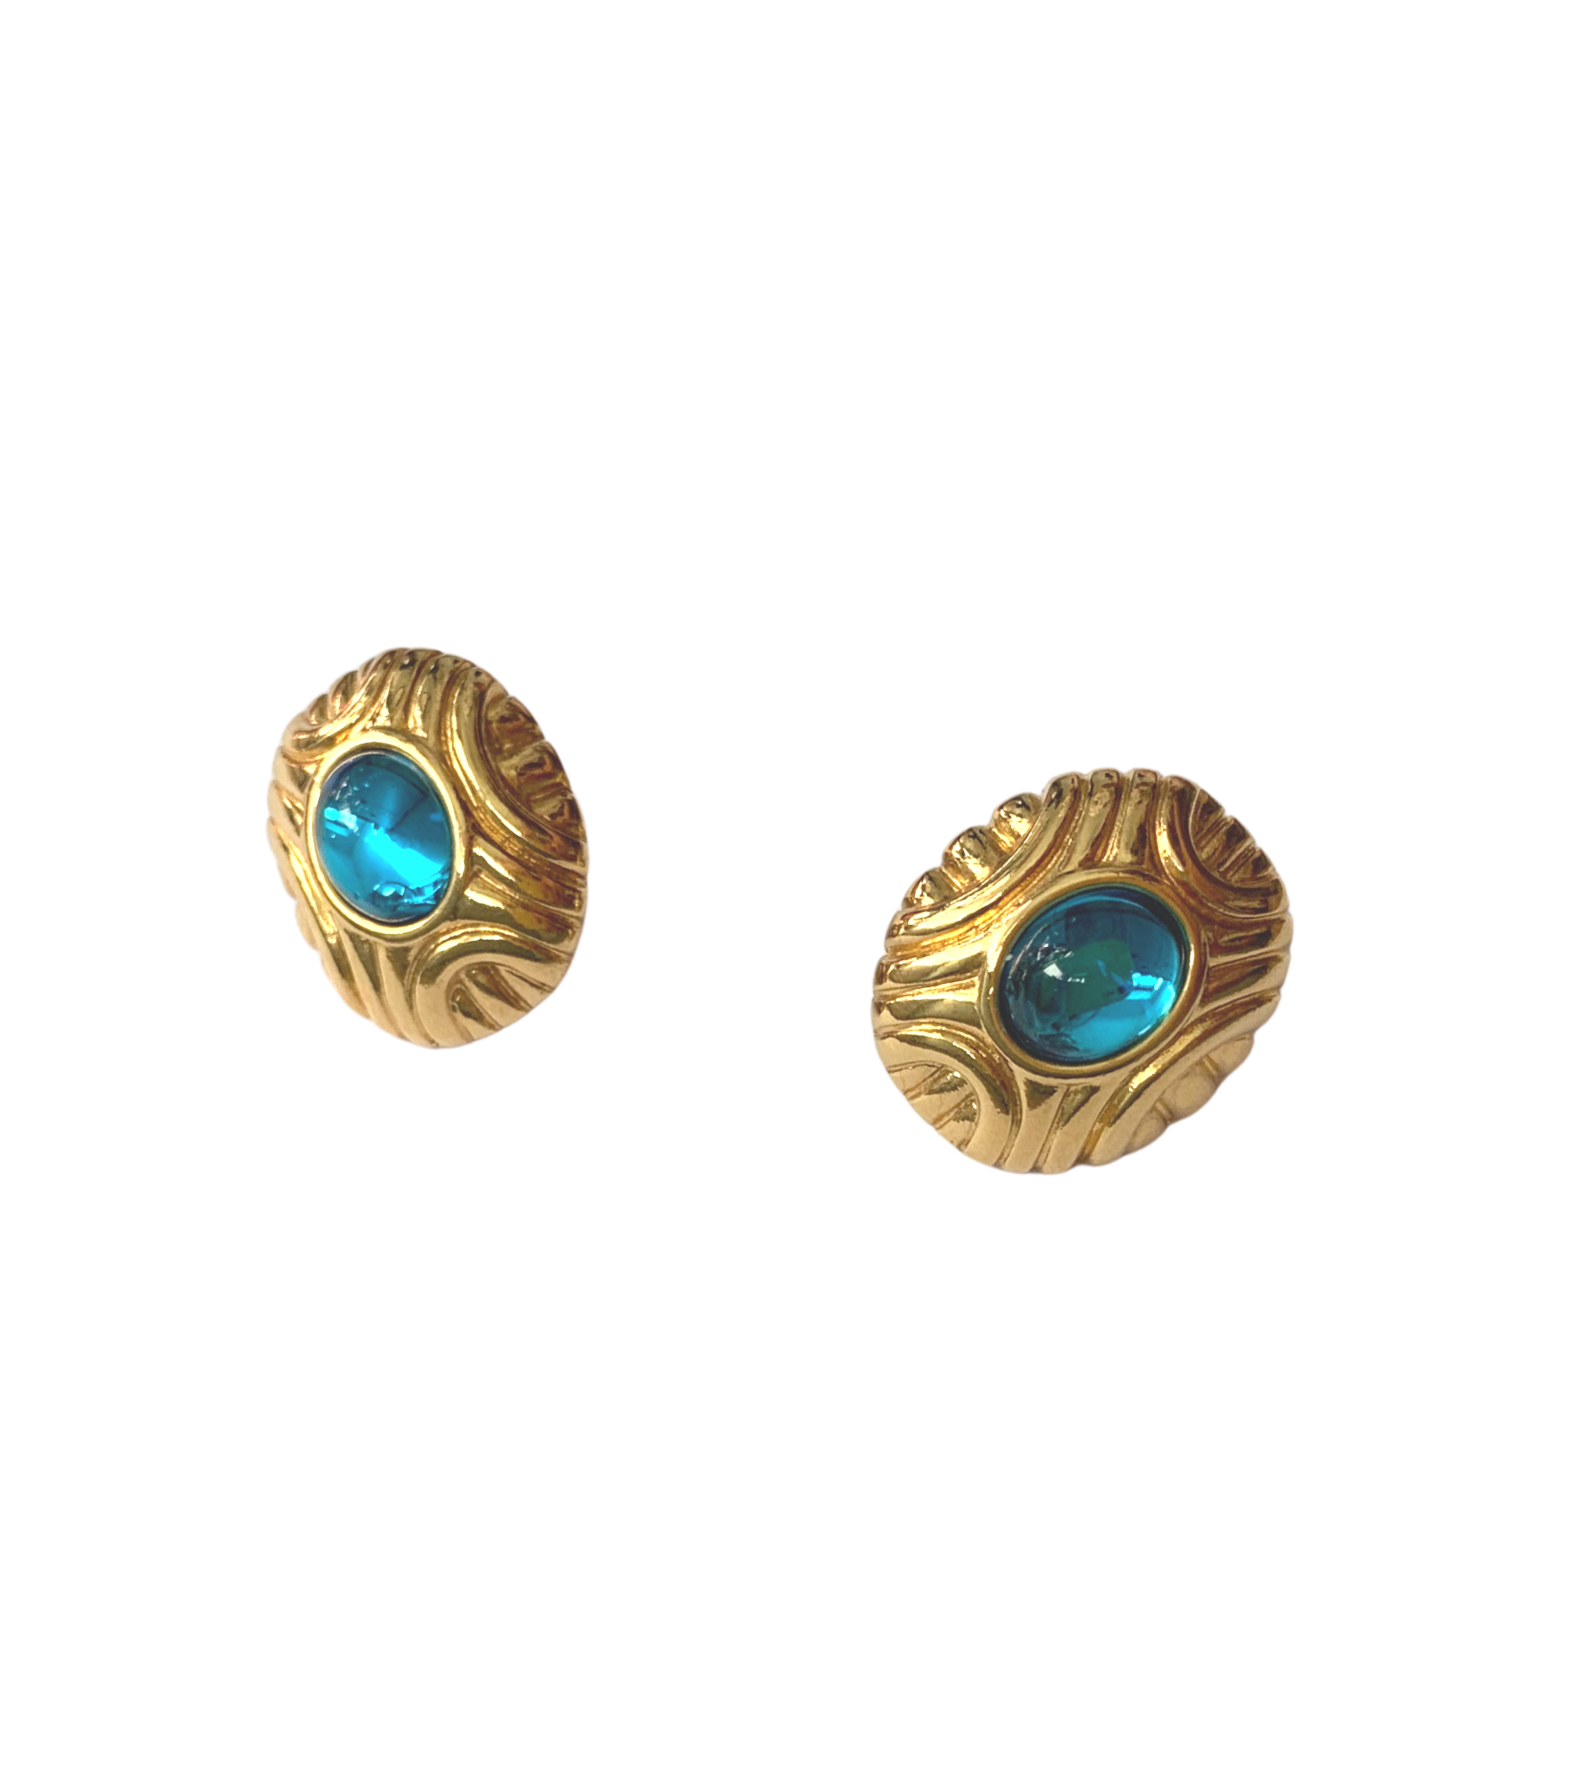 Vintage Monet Clip On Gold Tone & Turquoise Glass Earrings